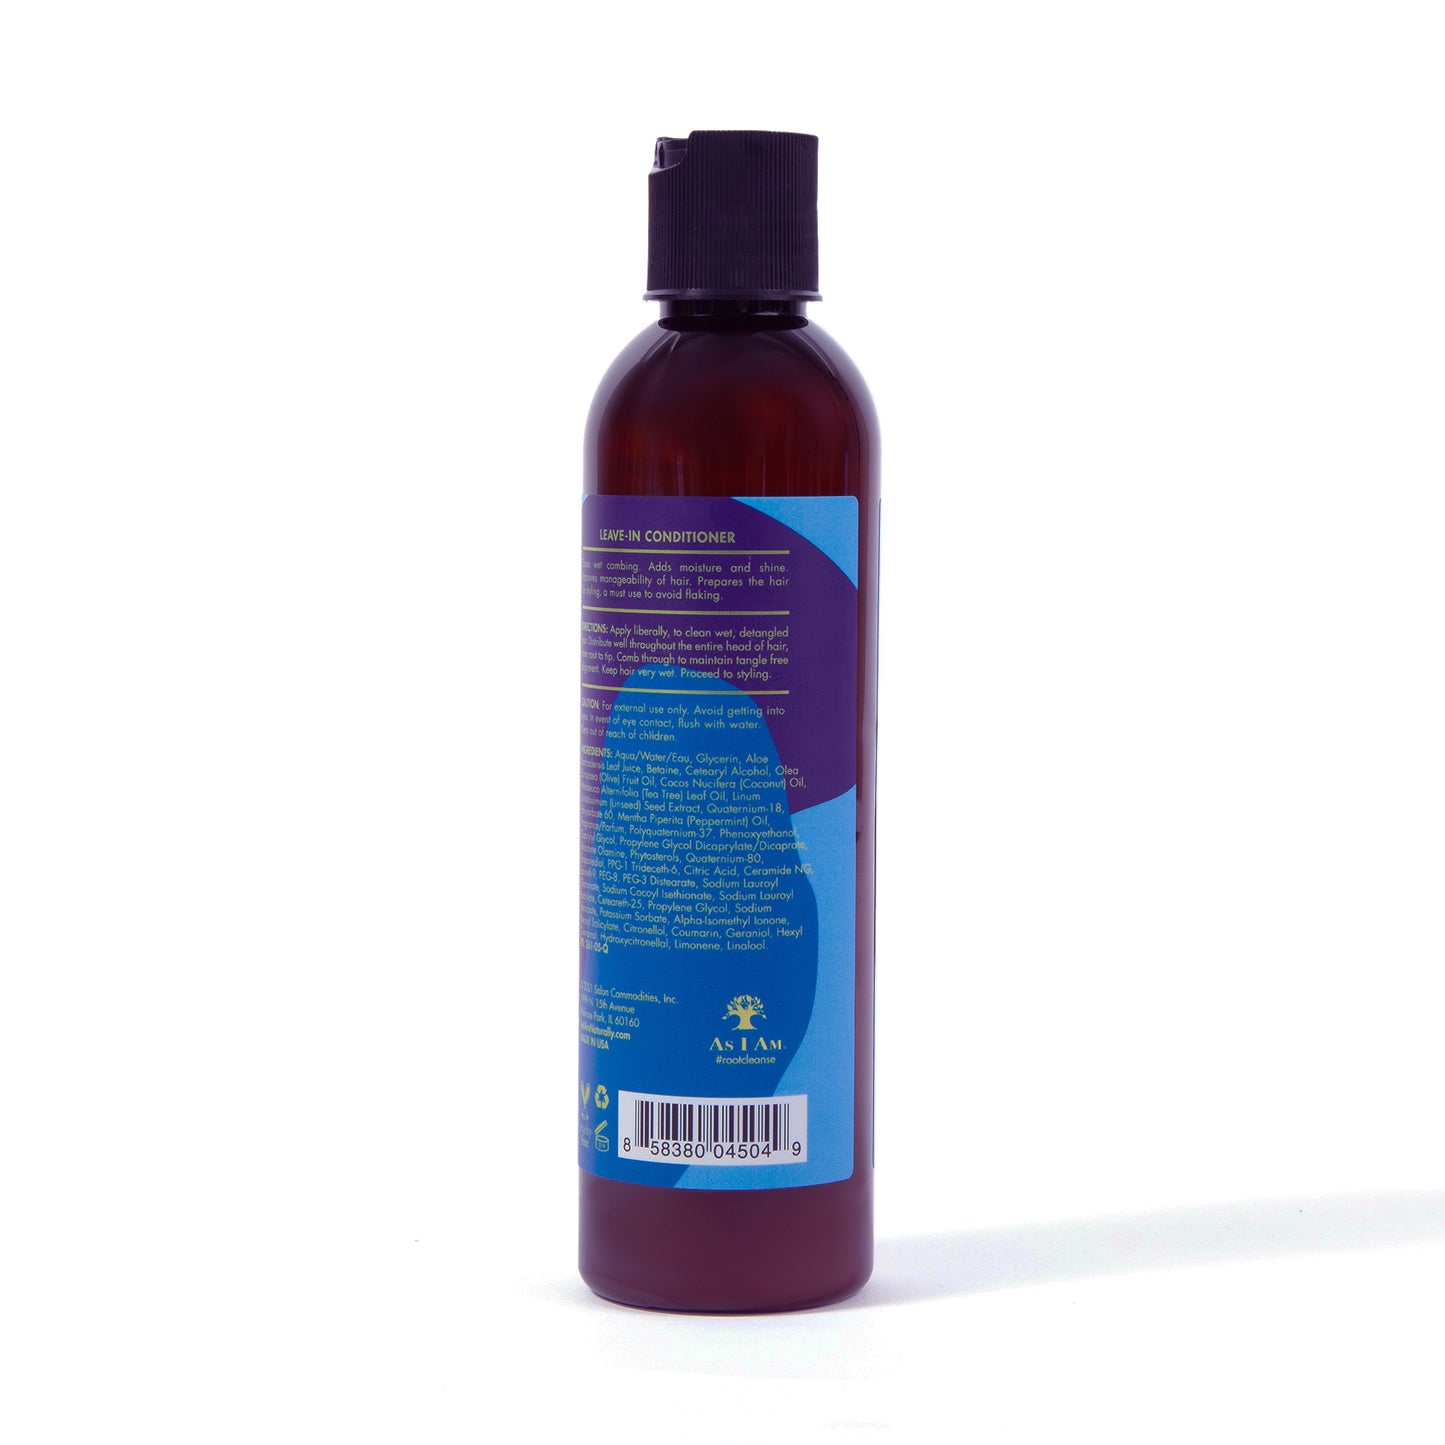 dry & itchy scalp care leave-in conditioner